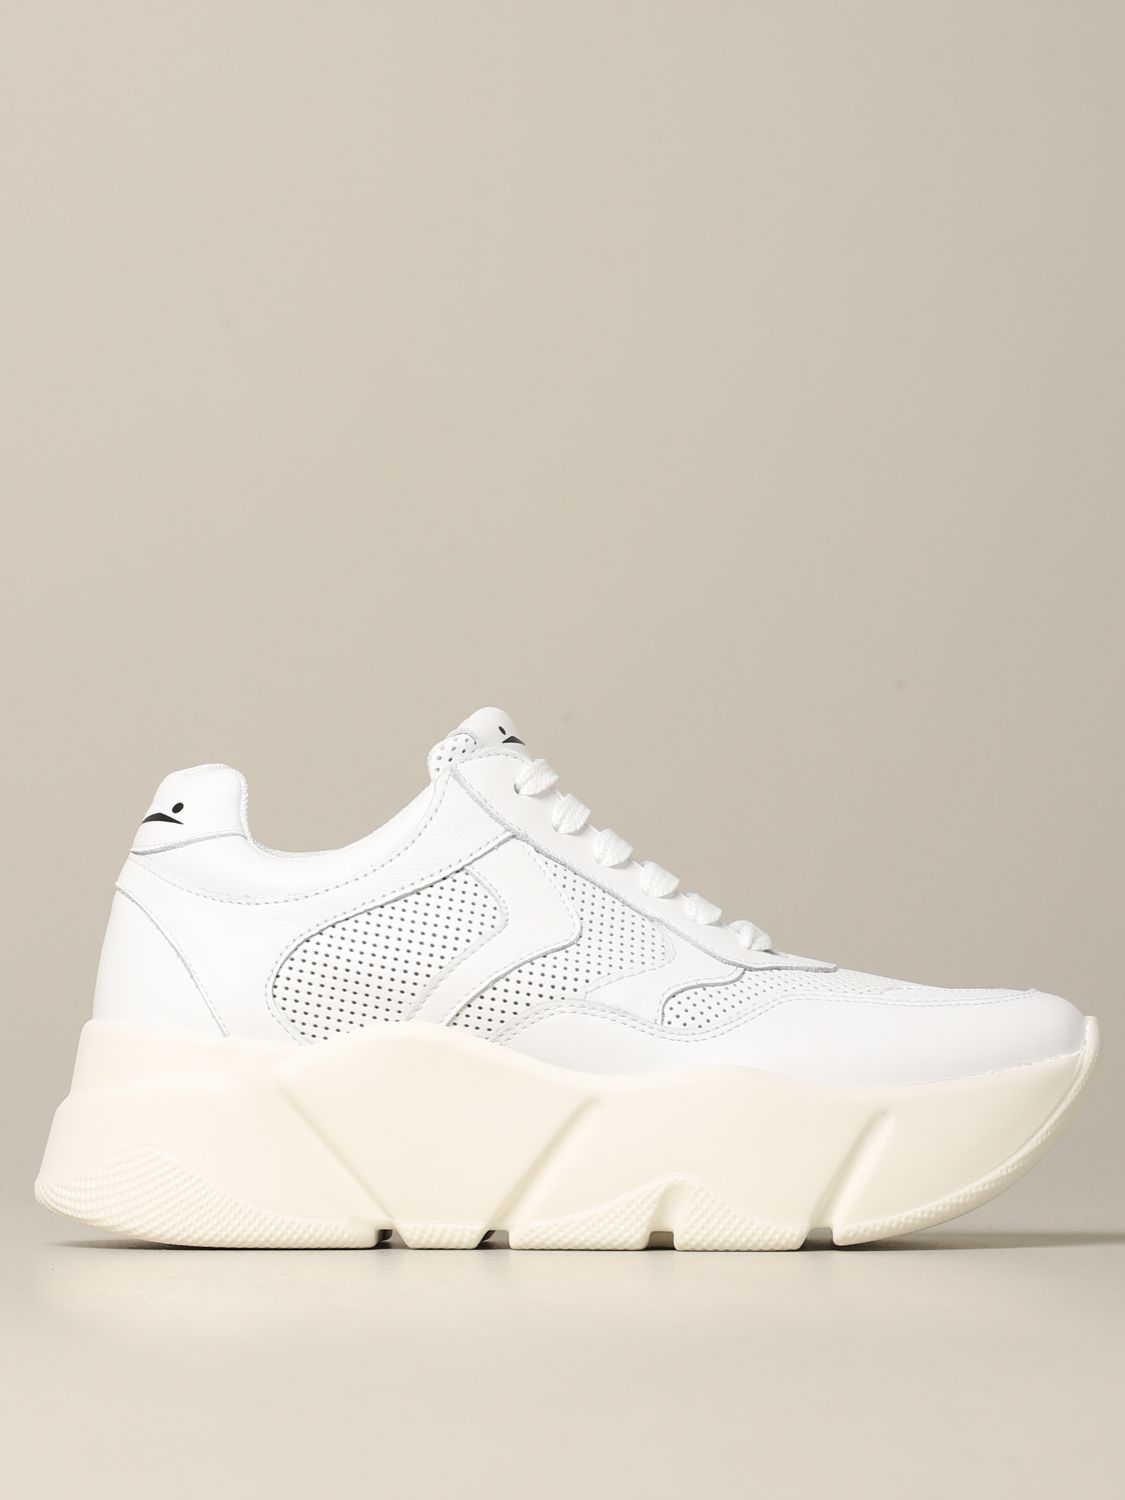 Voile Blanche sneakers in smooth and perforated leather | Sneakers ...